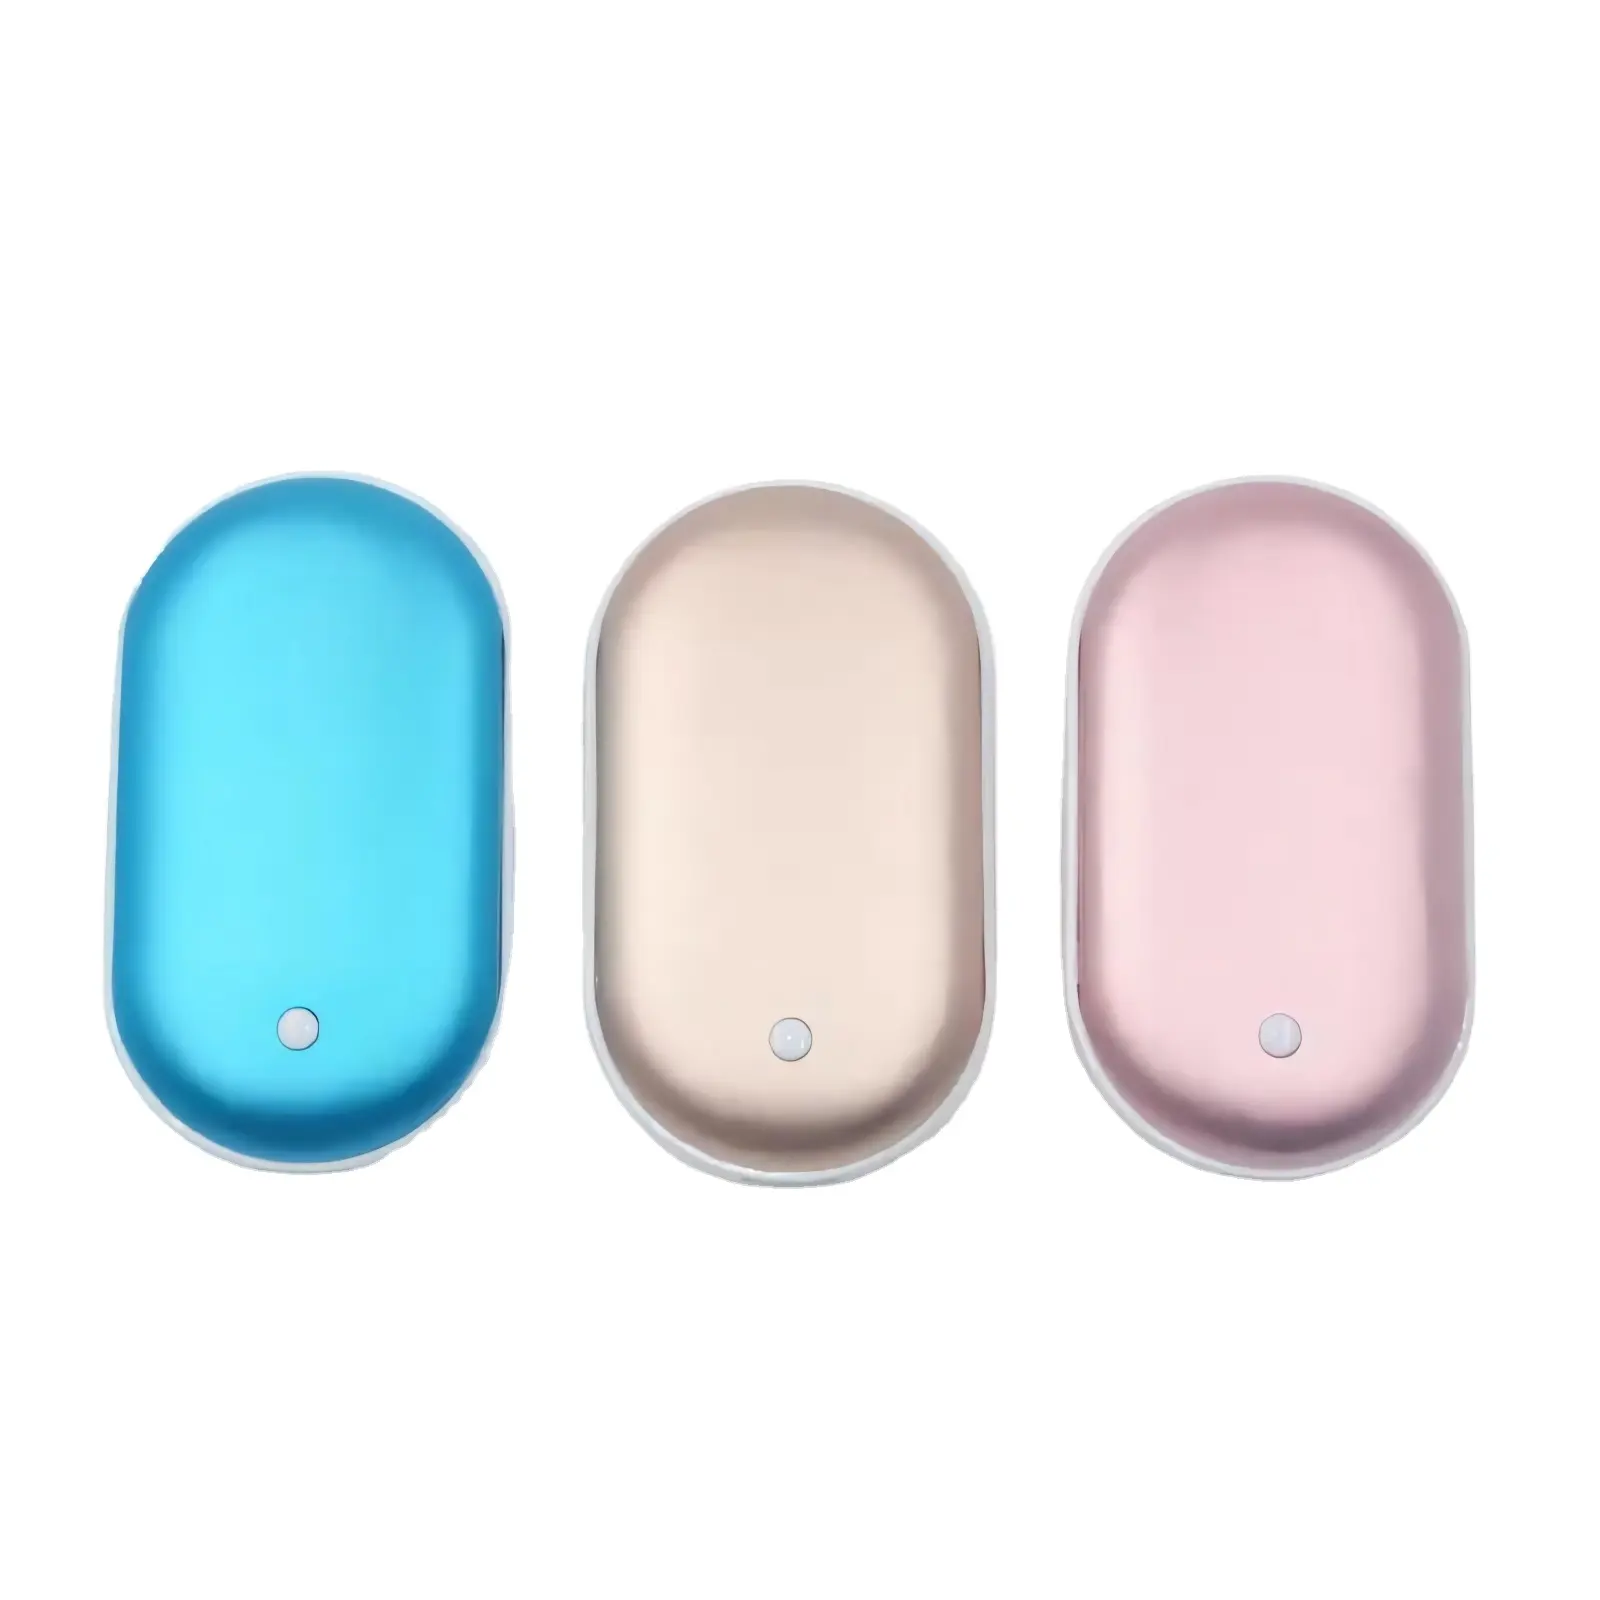 Rechargeable Electronic Portable Hand Warmer With Fast Charge Reusable Electric Handwarmer With Mobile Power Bank